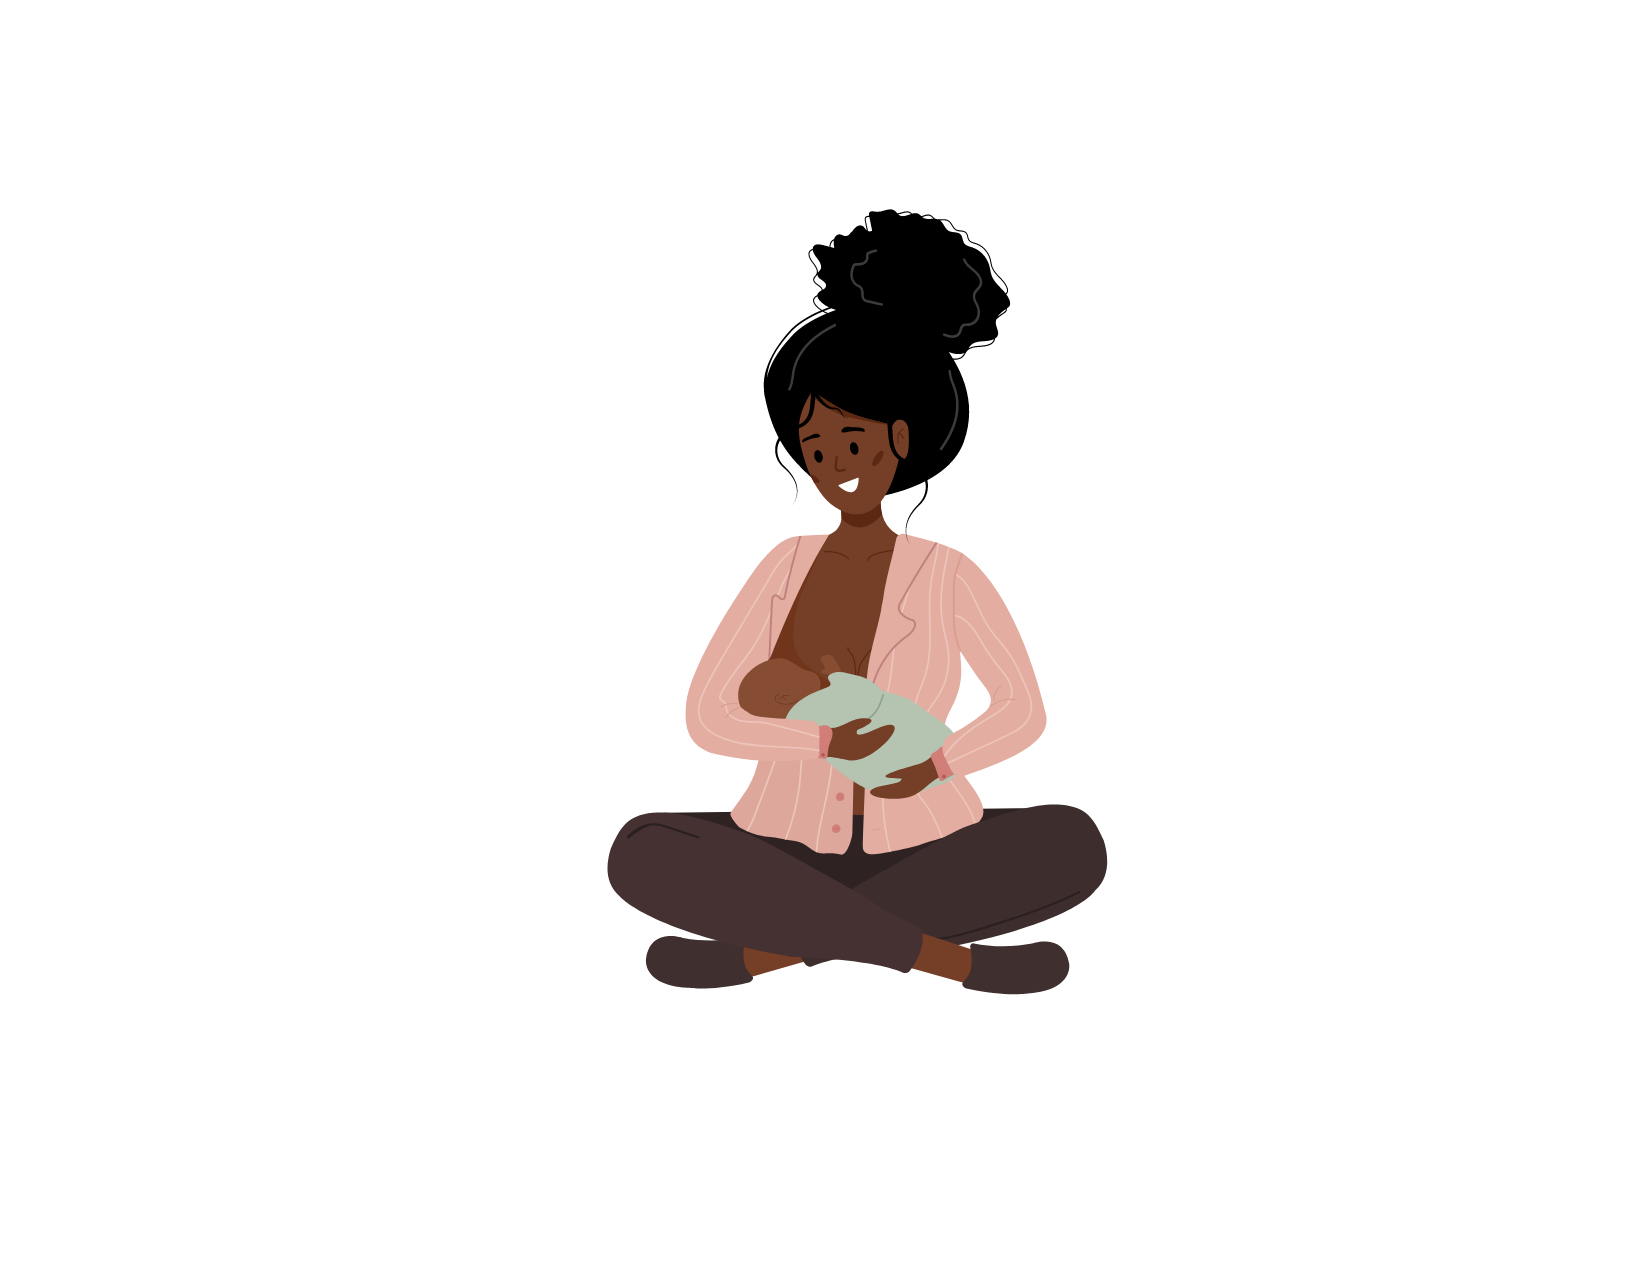 illustrated image of person sitting cross legged while breastfeeding / chestfeeding a baby